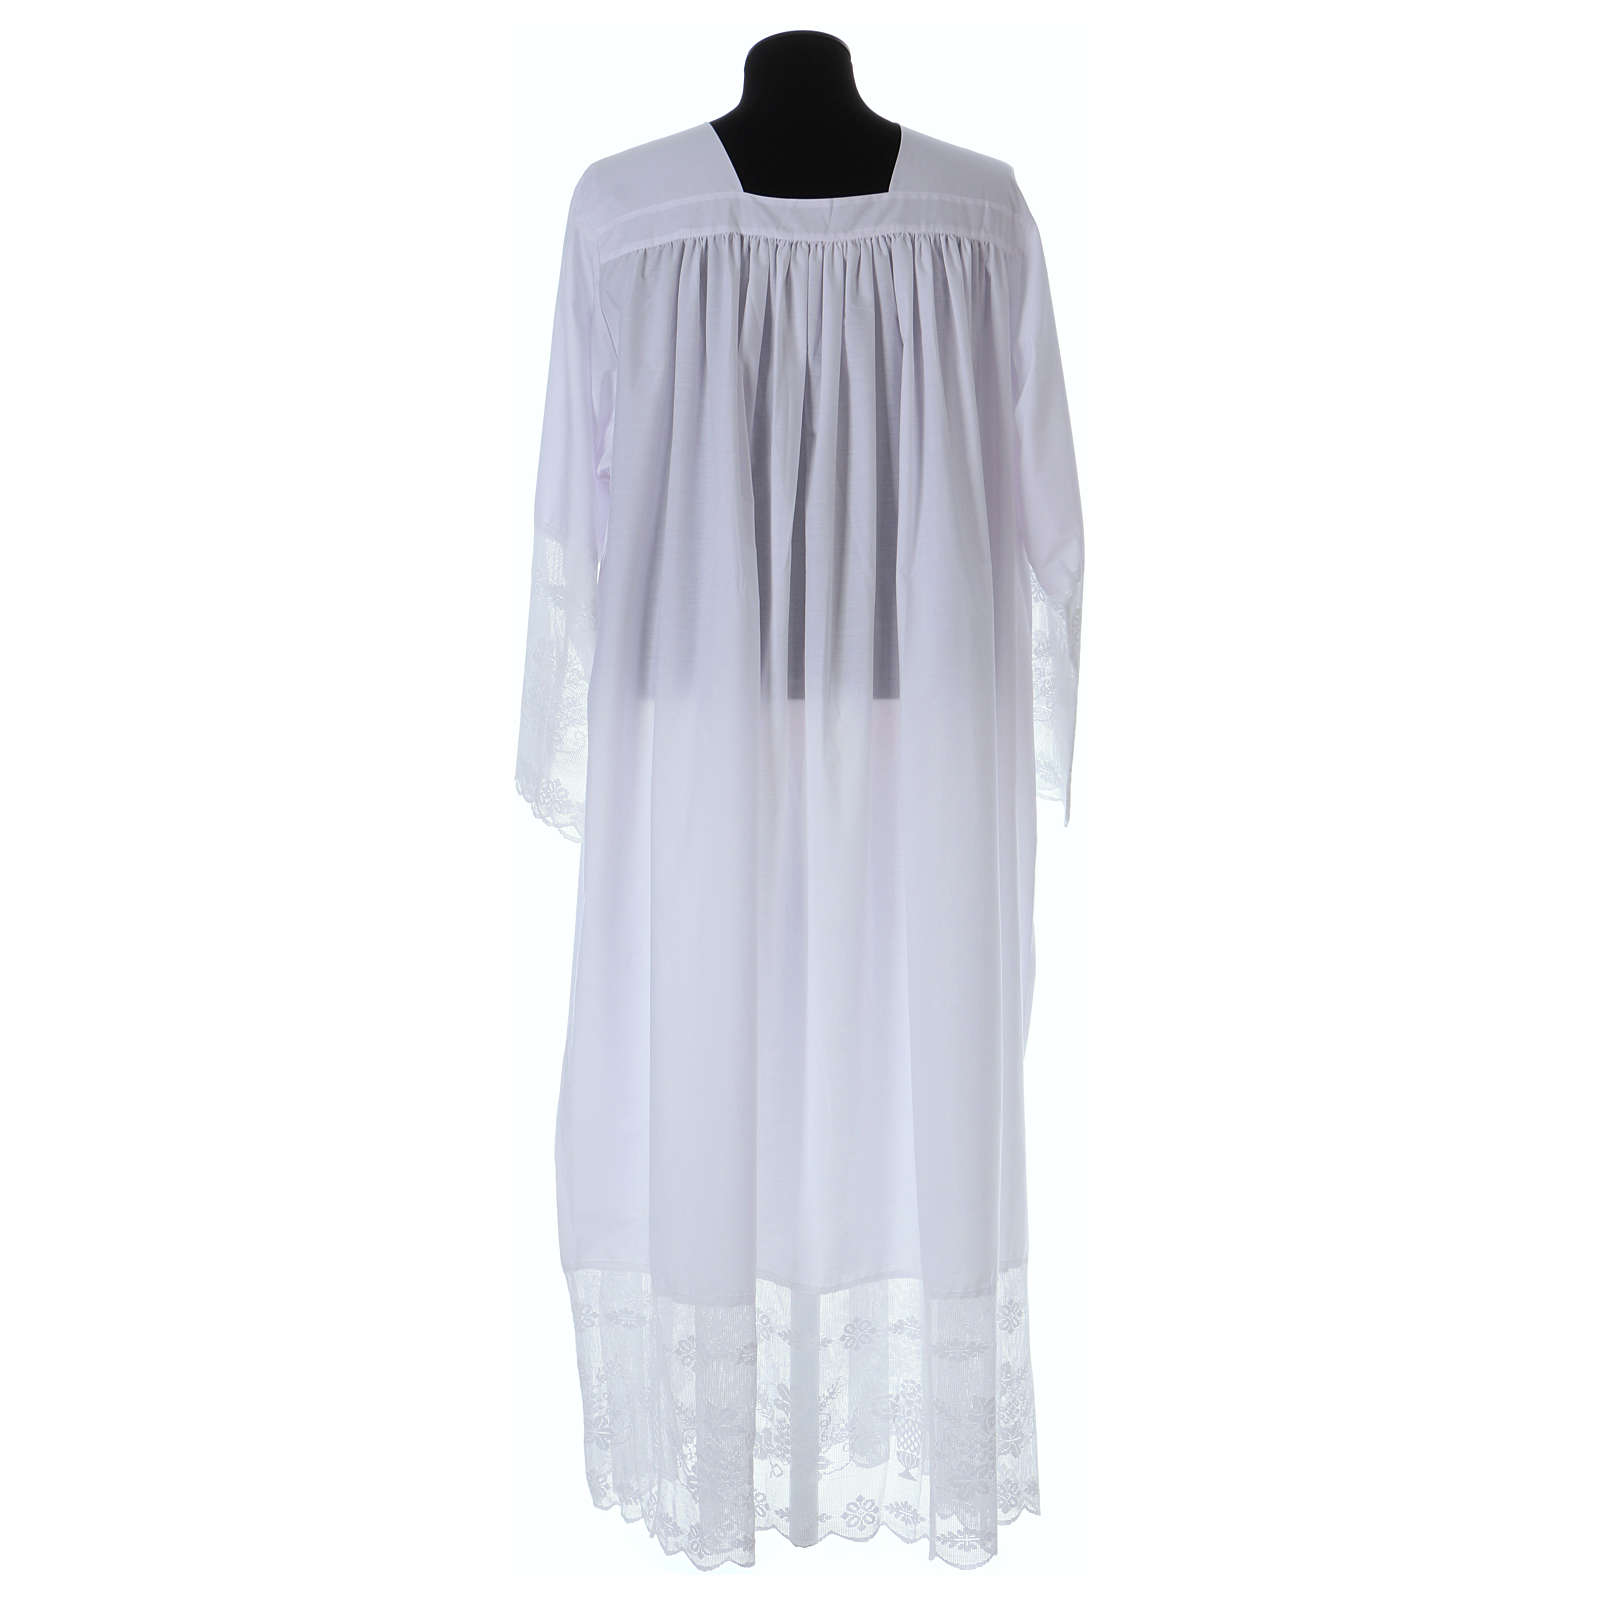 Cotton blend Priest Alb with square-neck and IHS lace | online sales on ...